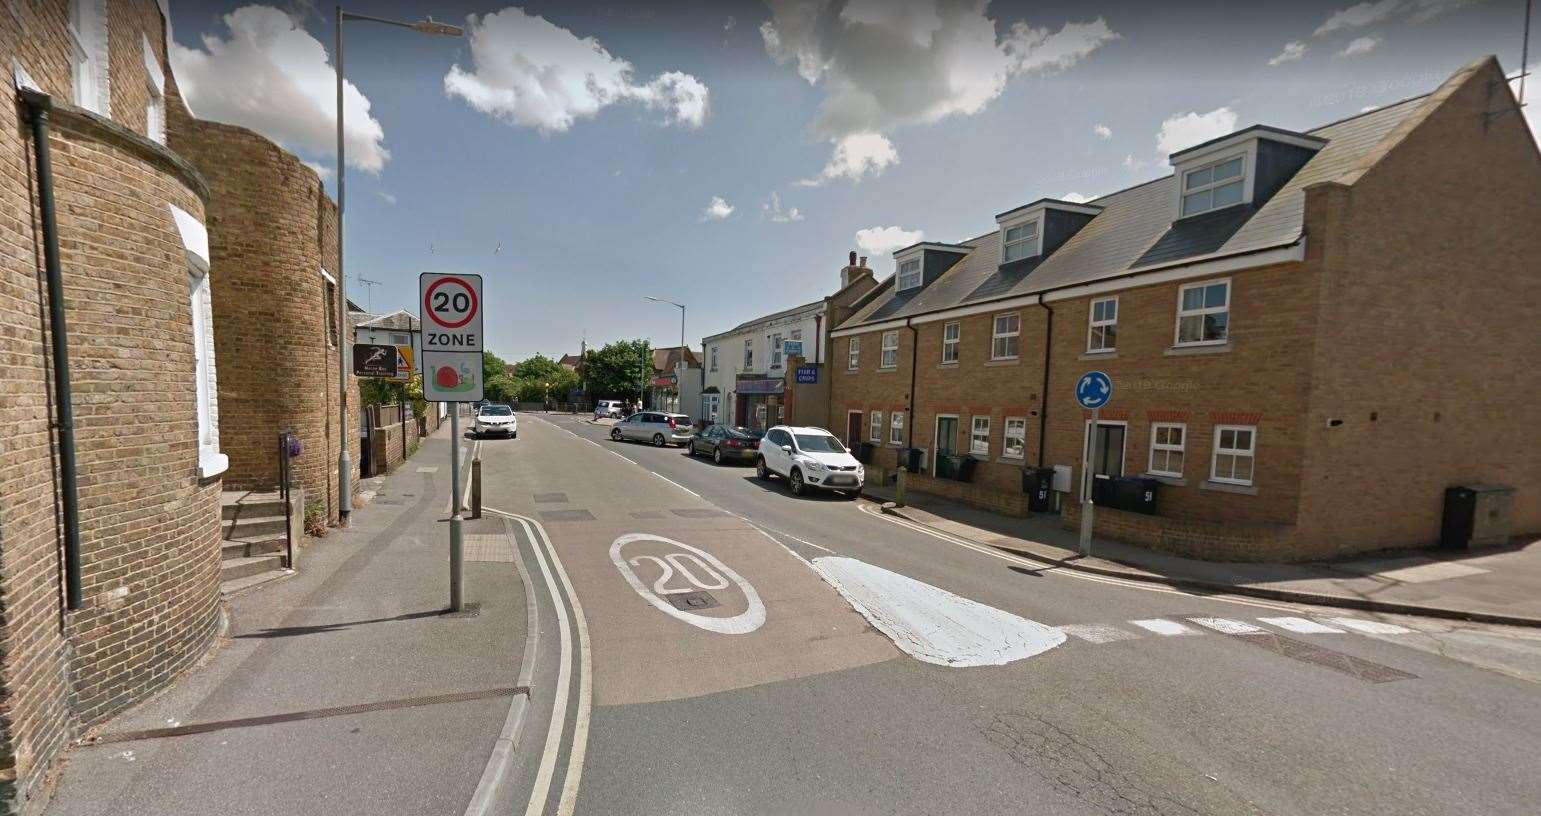 One of the break-ins took place in King's Road, Herne Bay. Picture: Google